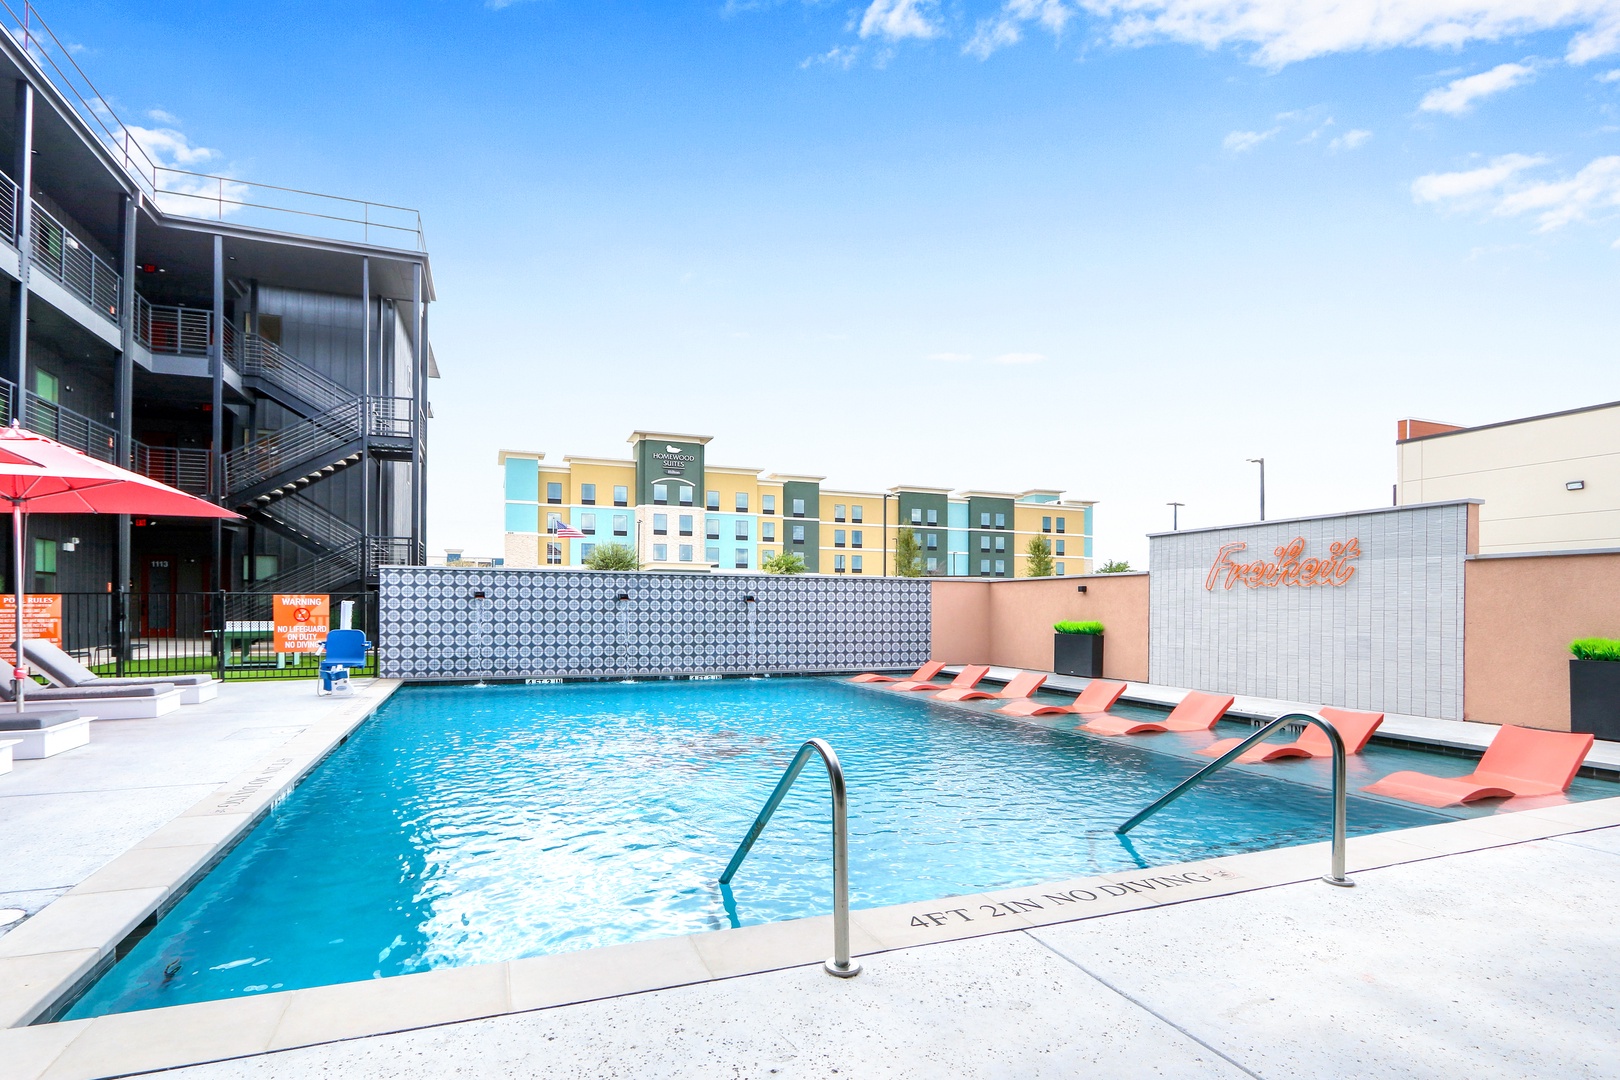 Kick back & relax or make a splash at the sparkling community pool!